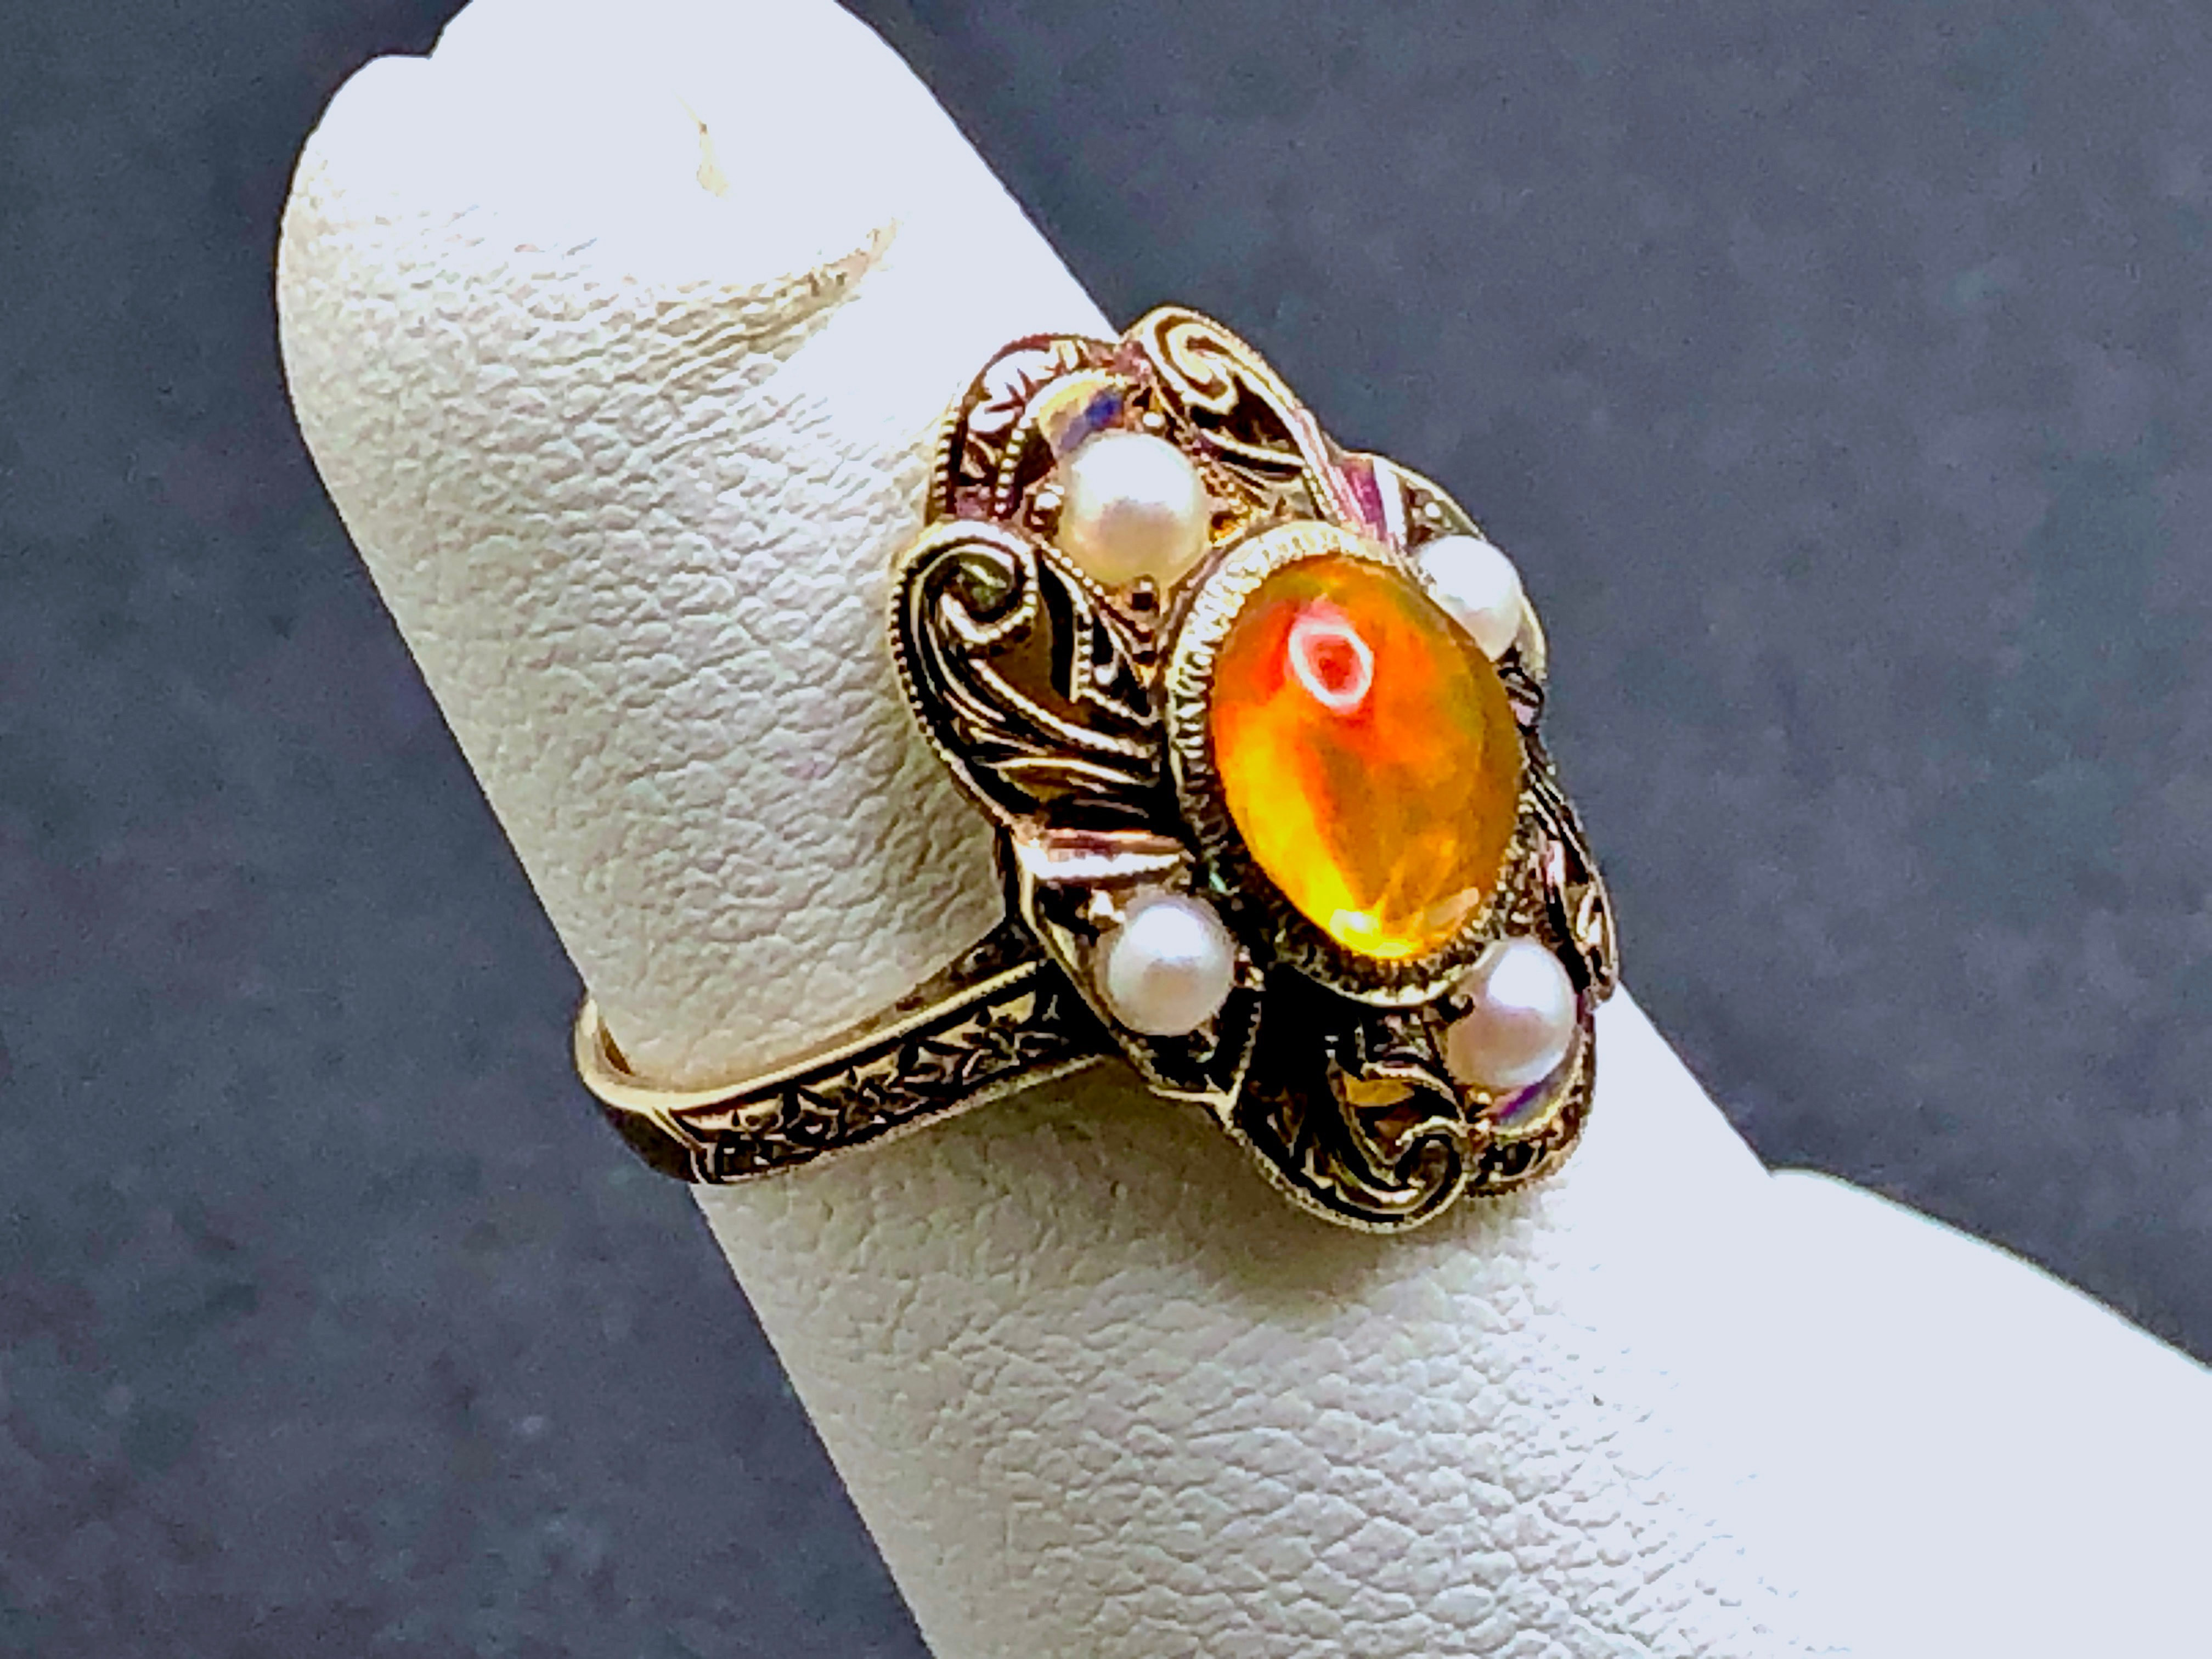 14K Rose Gold Fire Opal and Diamond Ring